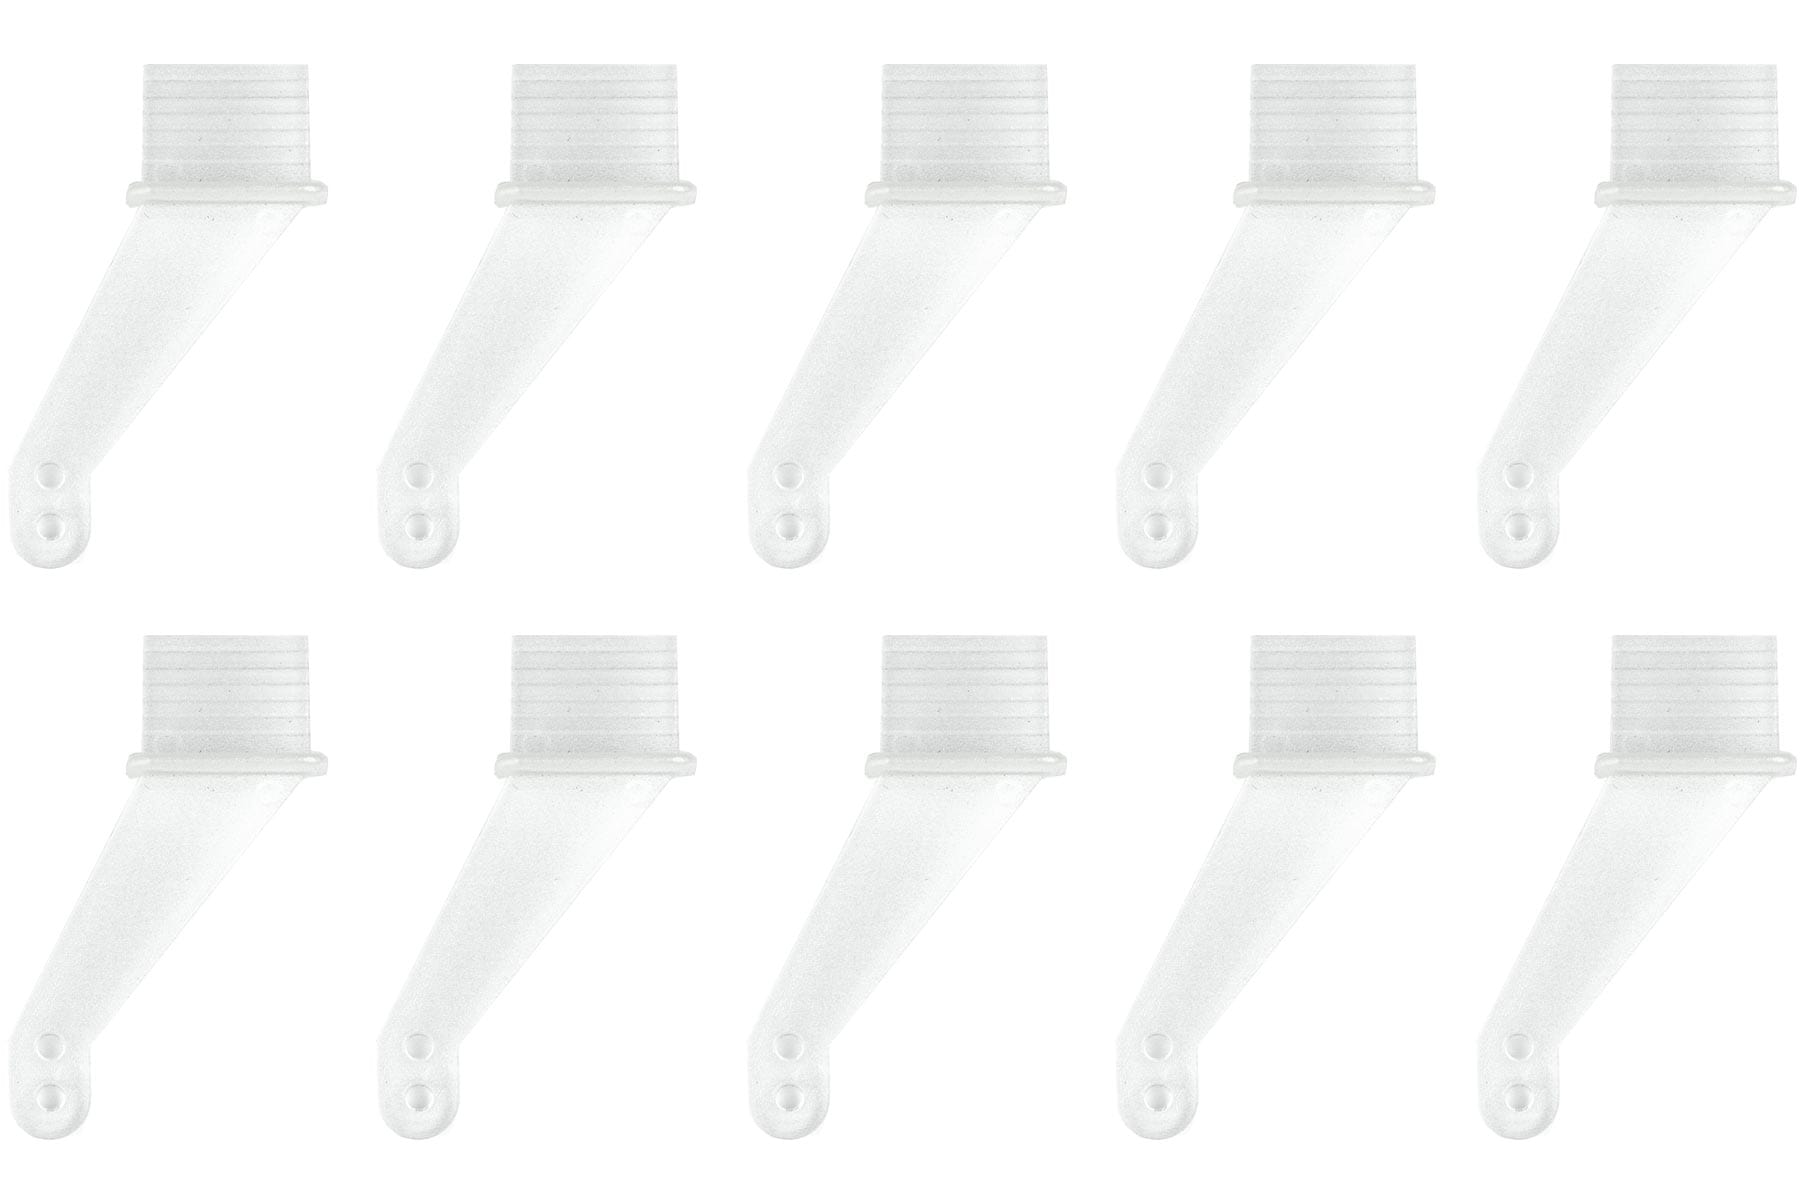 BenchCraft Mini Control Horns - Clear (10 Pack) BCT5010-004